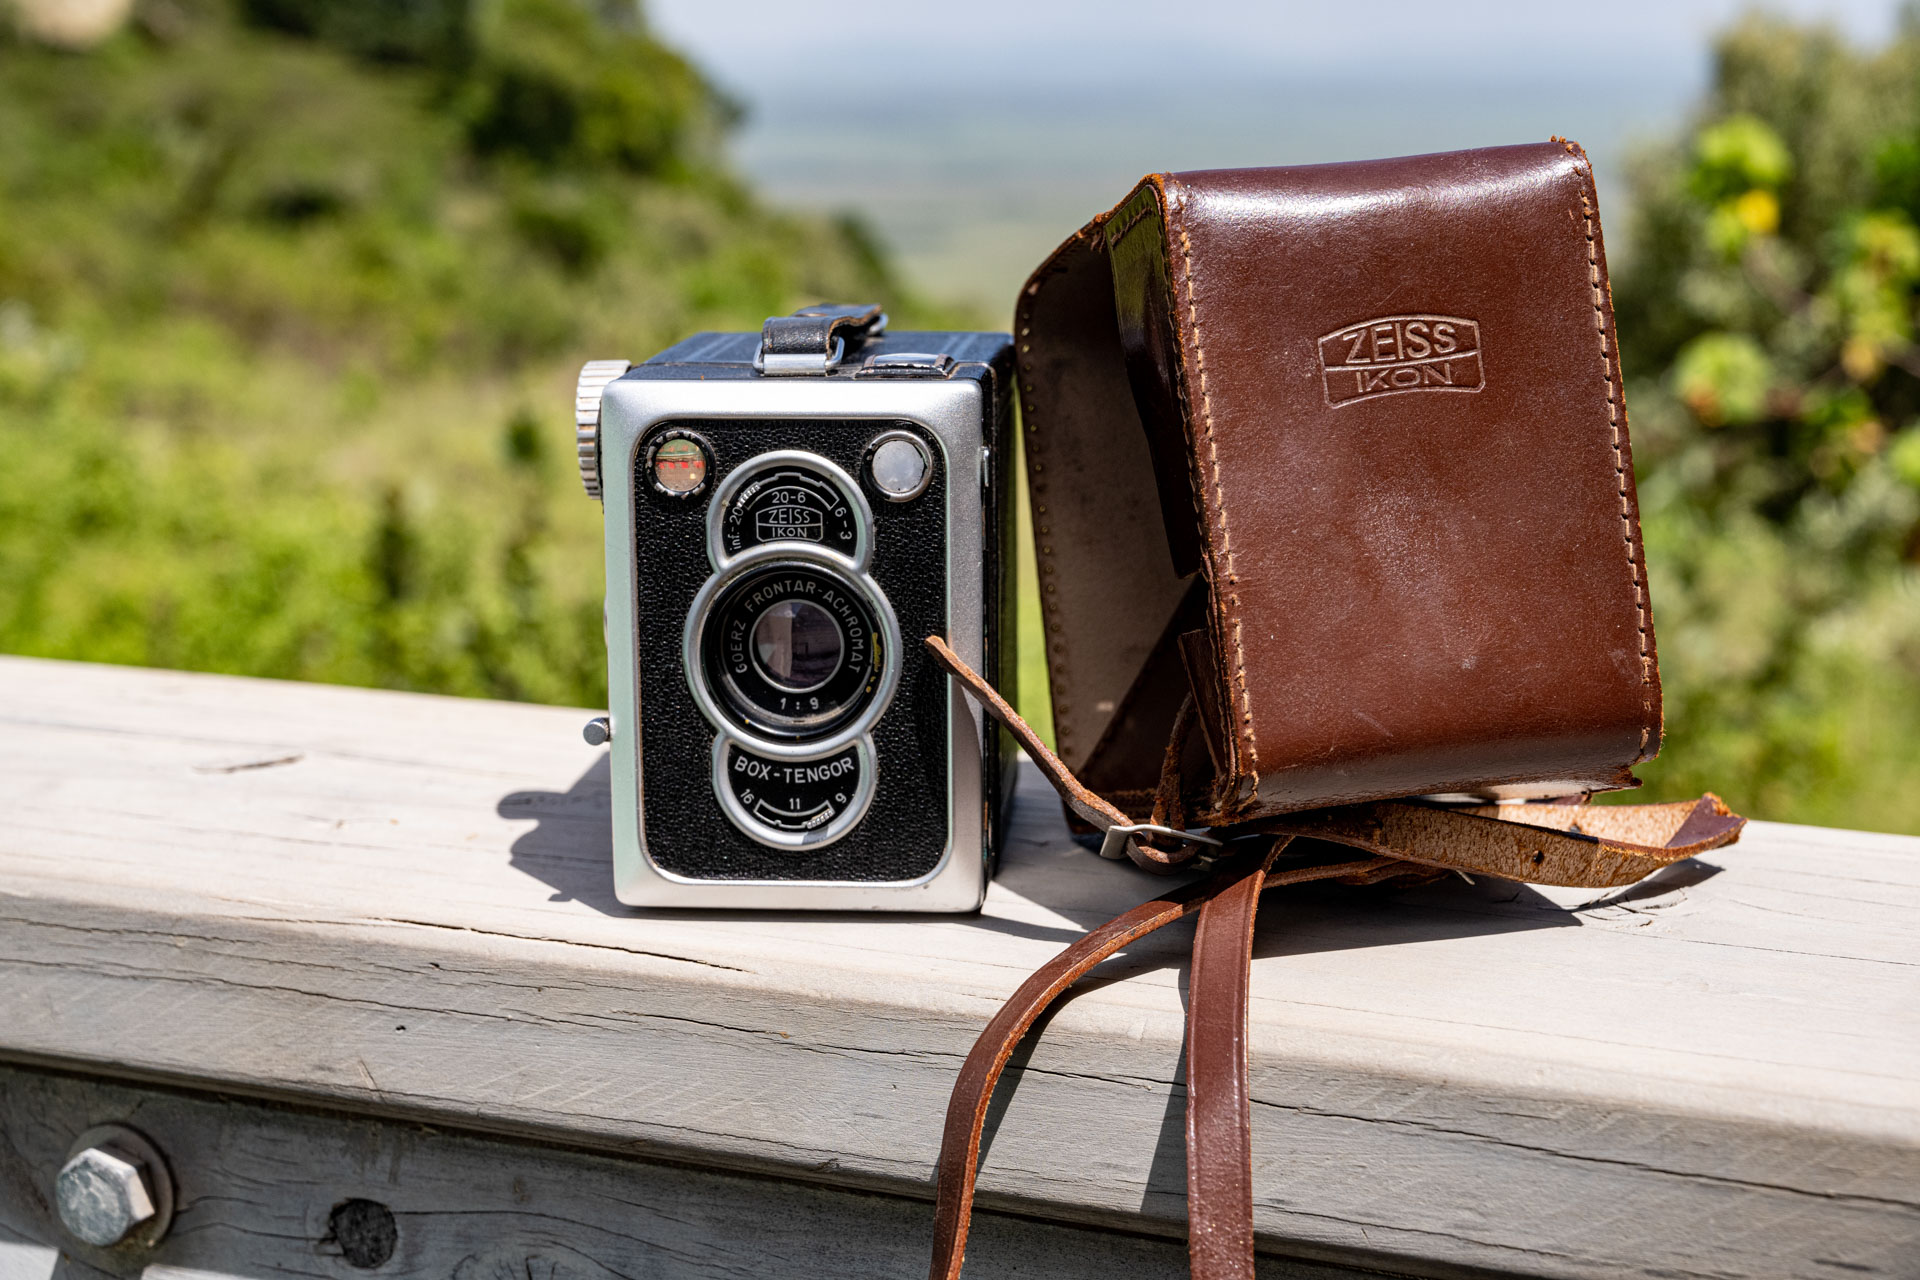 Above: The Zeiss Ikon Camera restored to its former glory